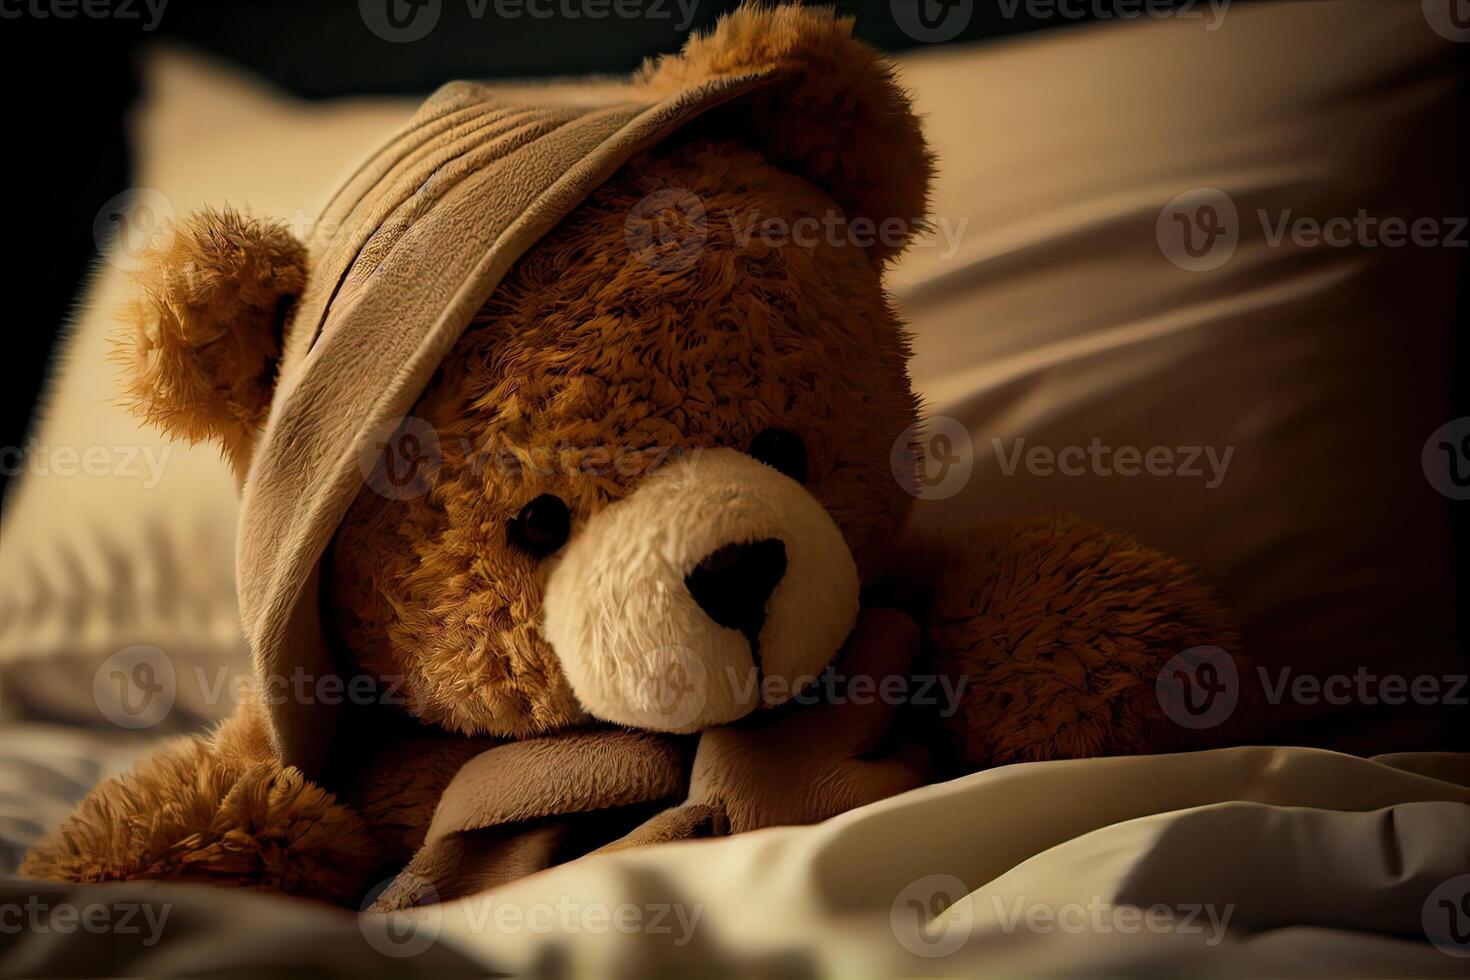 illustration of a teddy bear laying in bed and feeling sick photo